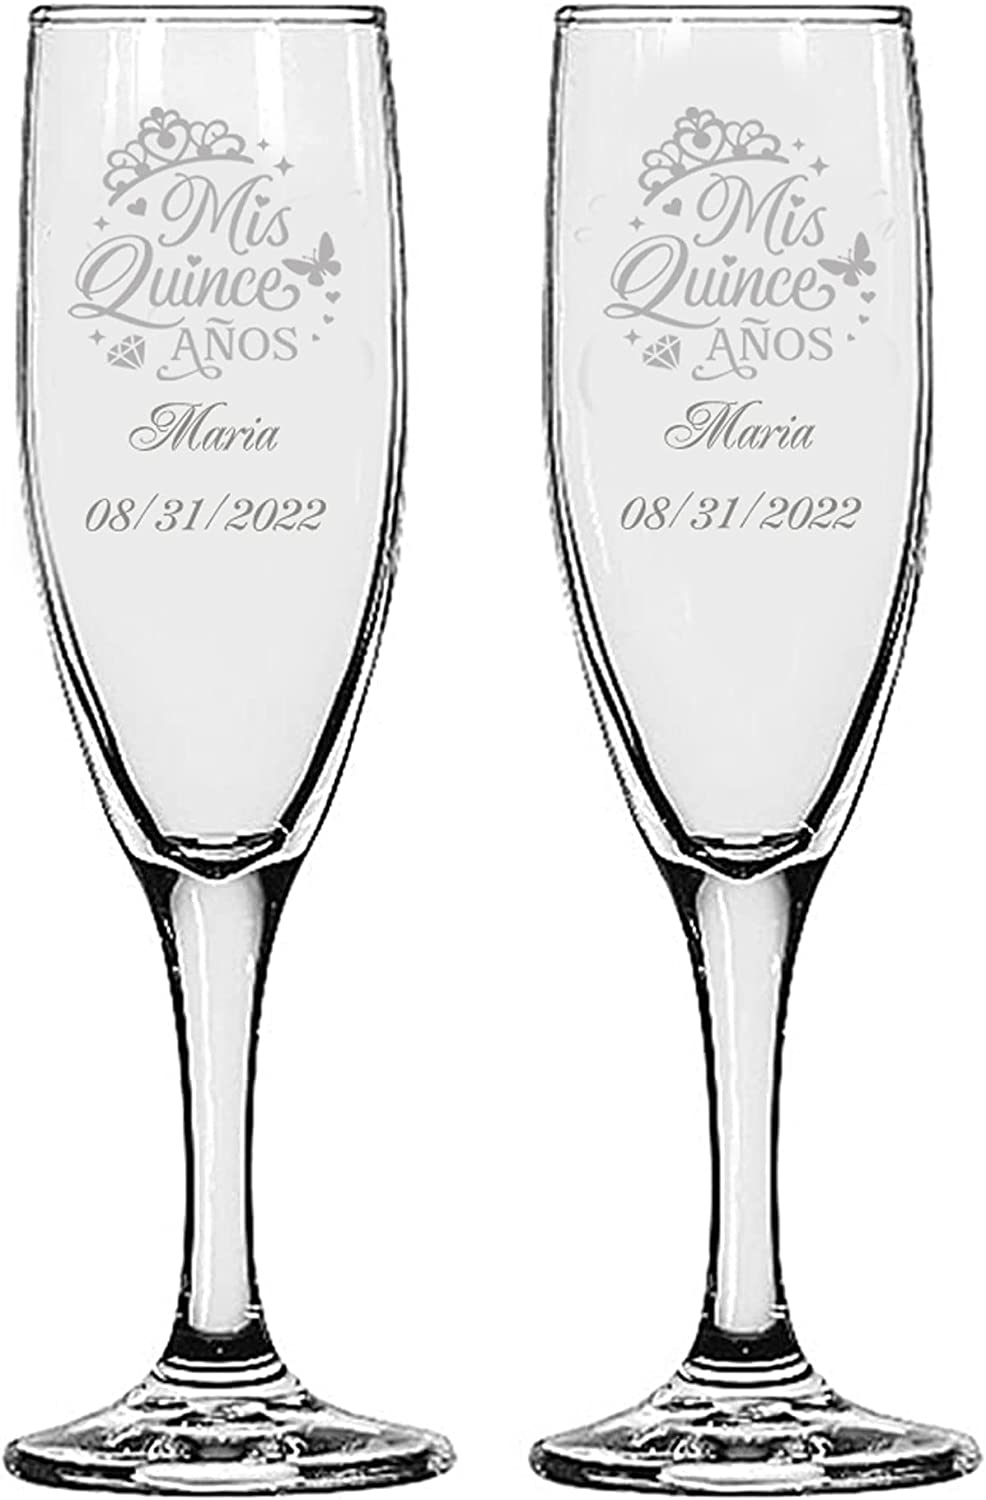 GIFTS INFINITY - Personalized Wedding Toasting Glasses (Reg Mis Quince Anos)- Set of 2